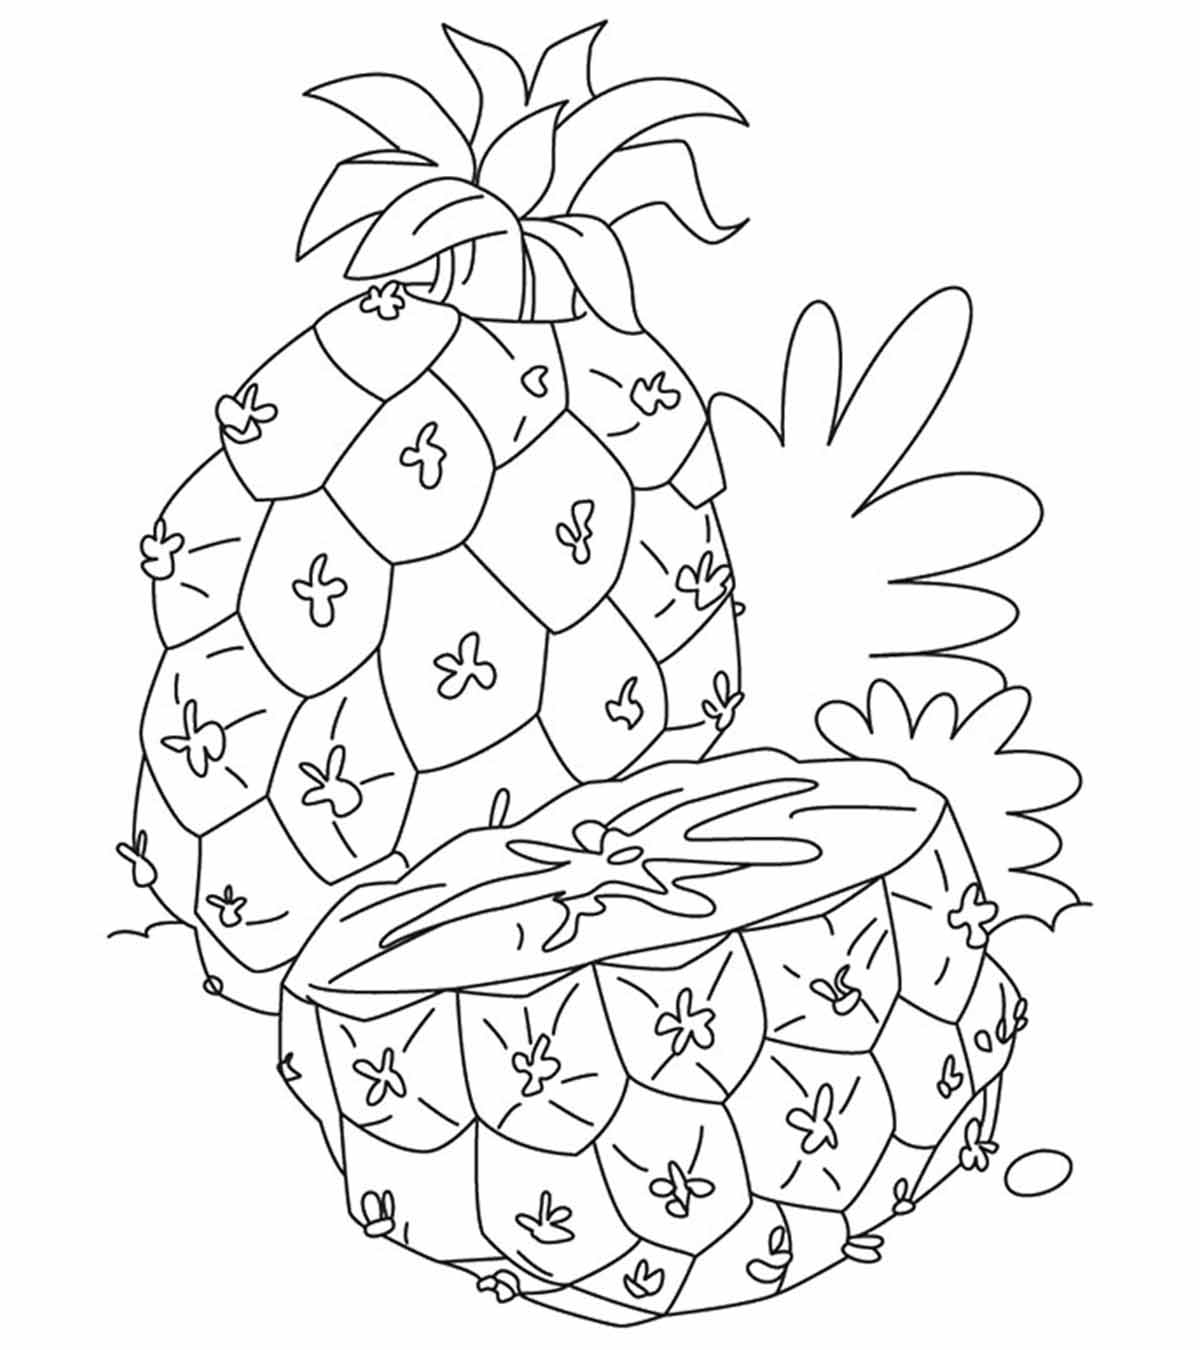 5600 Top Multiple Apple Coloring Pages  Images